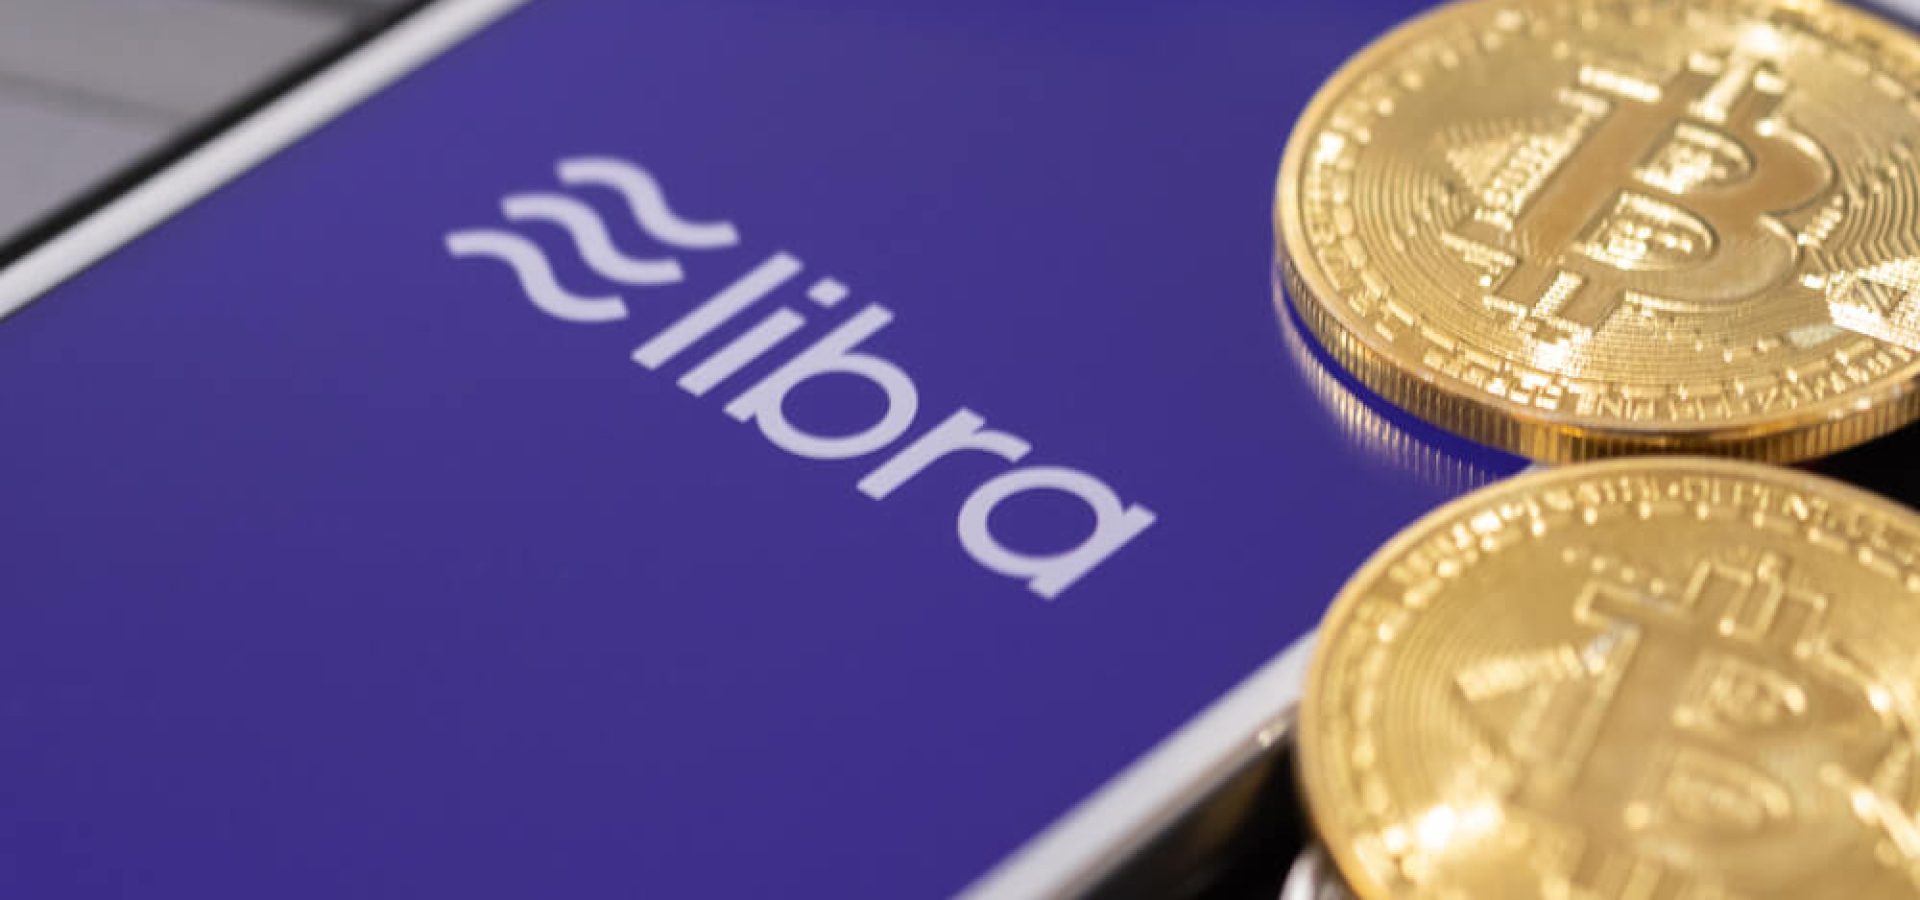 Wibest – Digital coins: Libra Facebook cryptocurrency and bitcoin